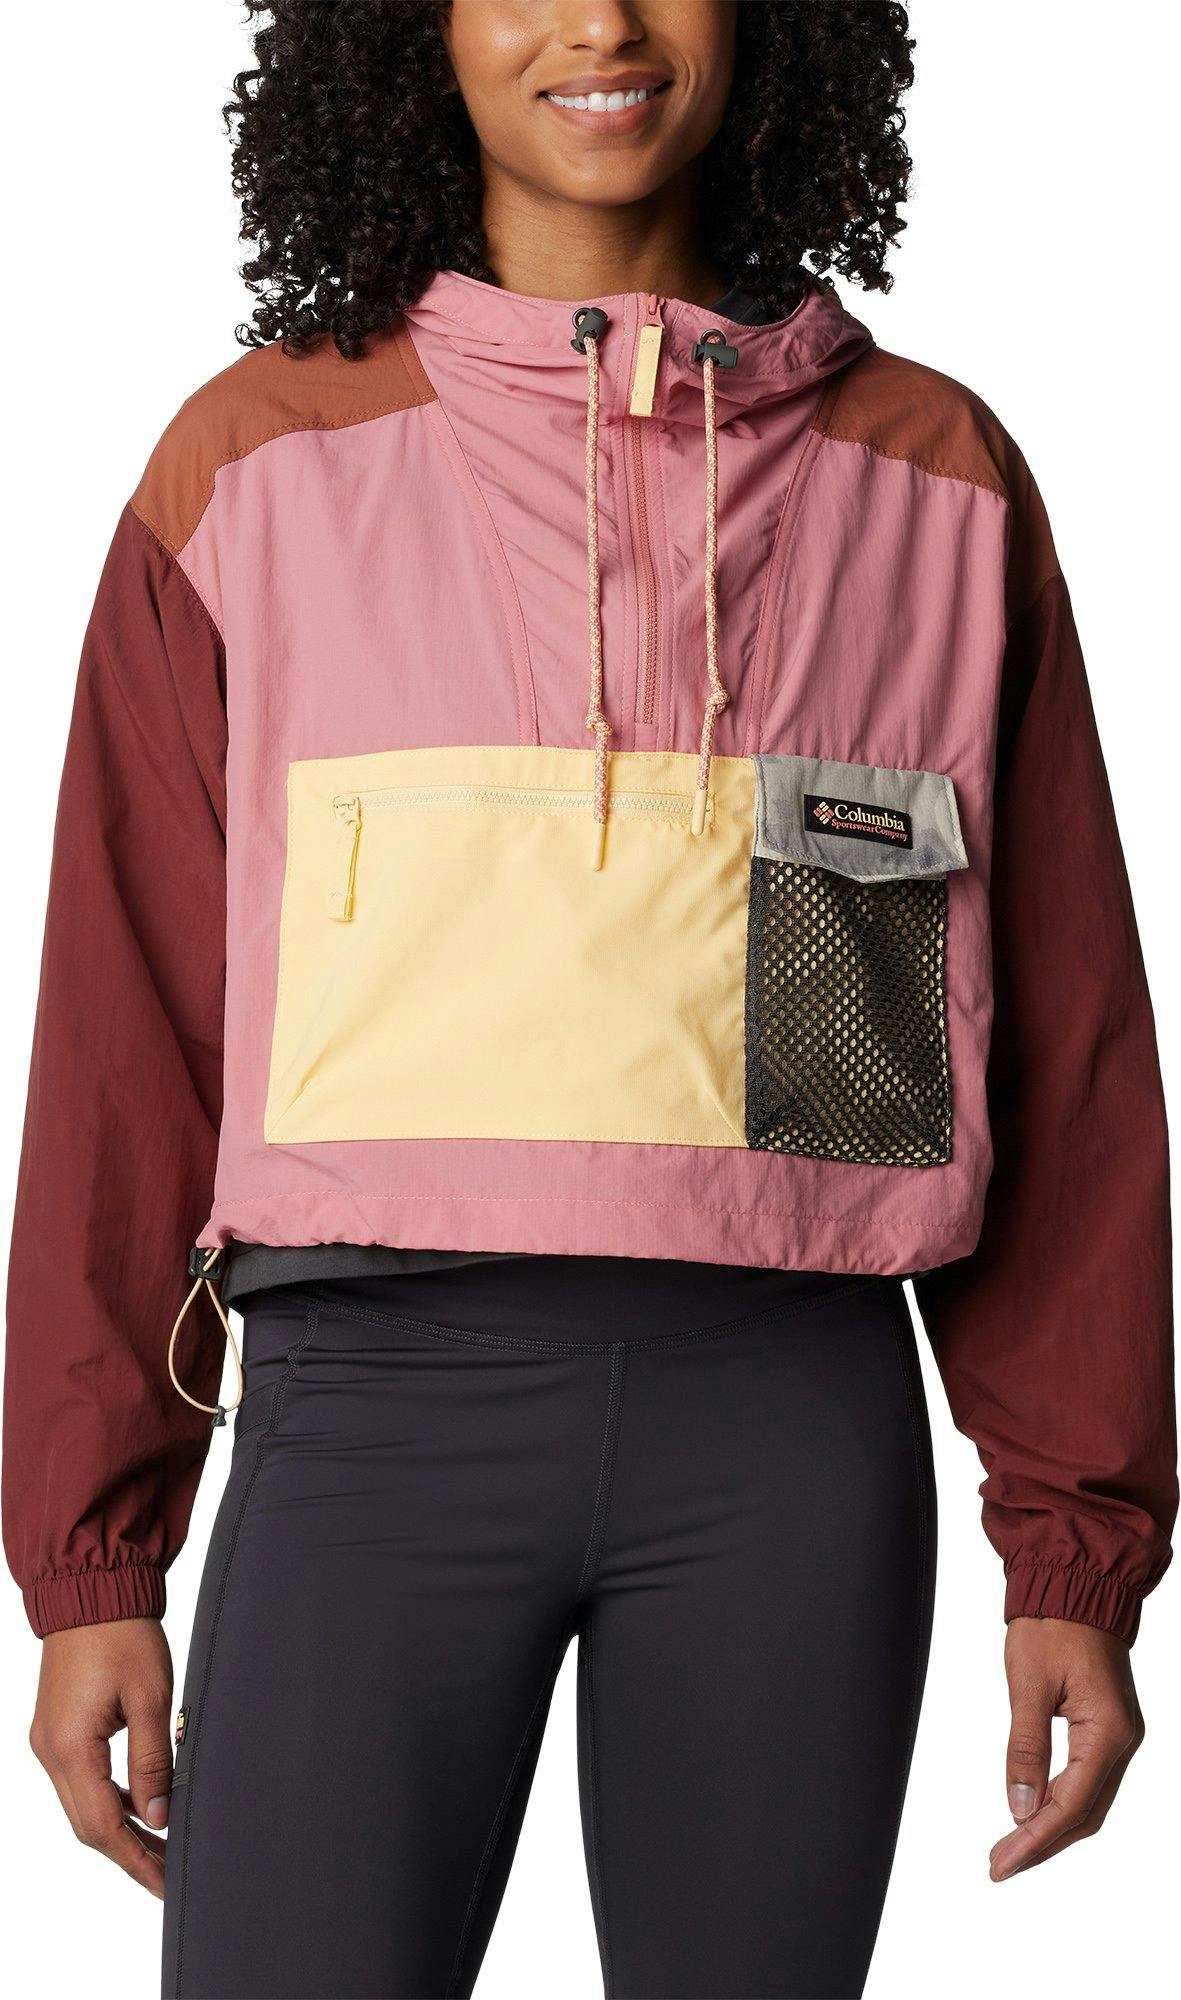 Product image for Painted Peak Cropped Wind Jacket - Women's